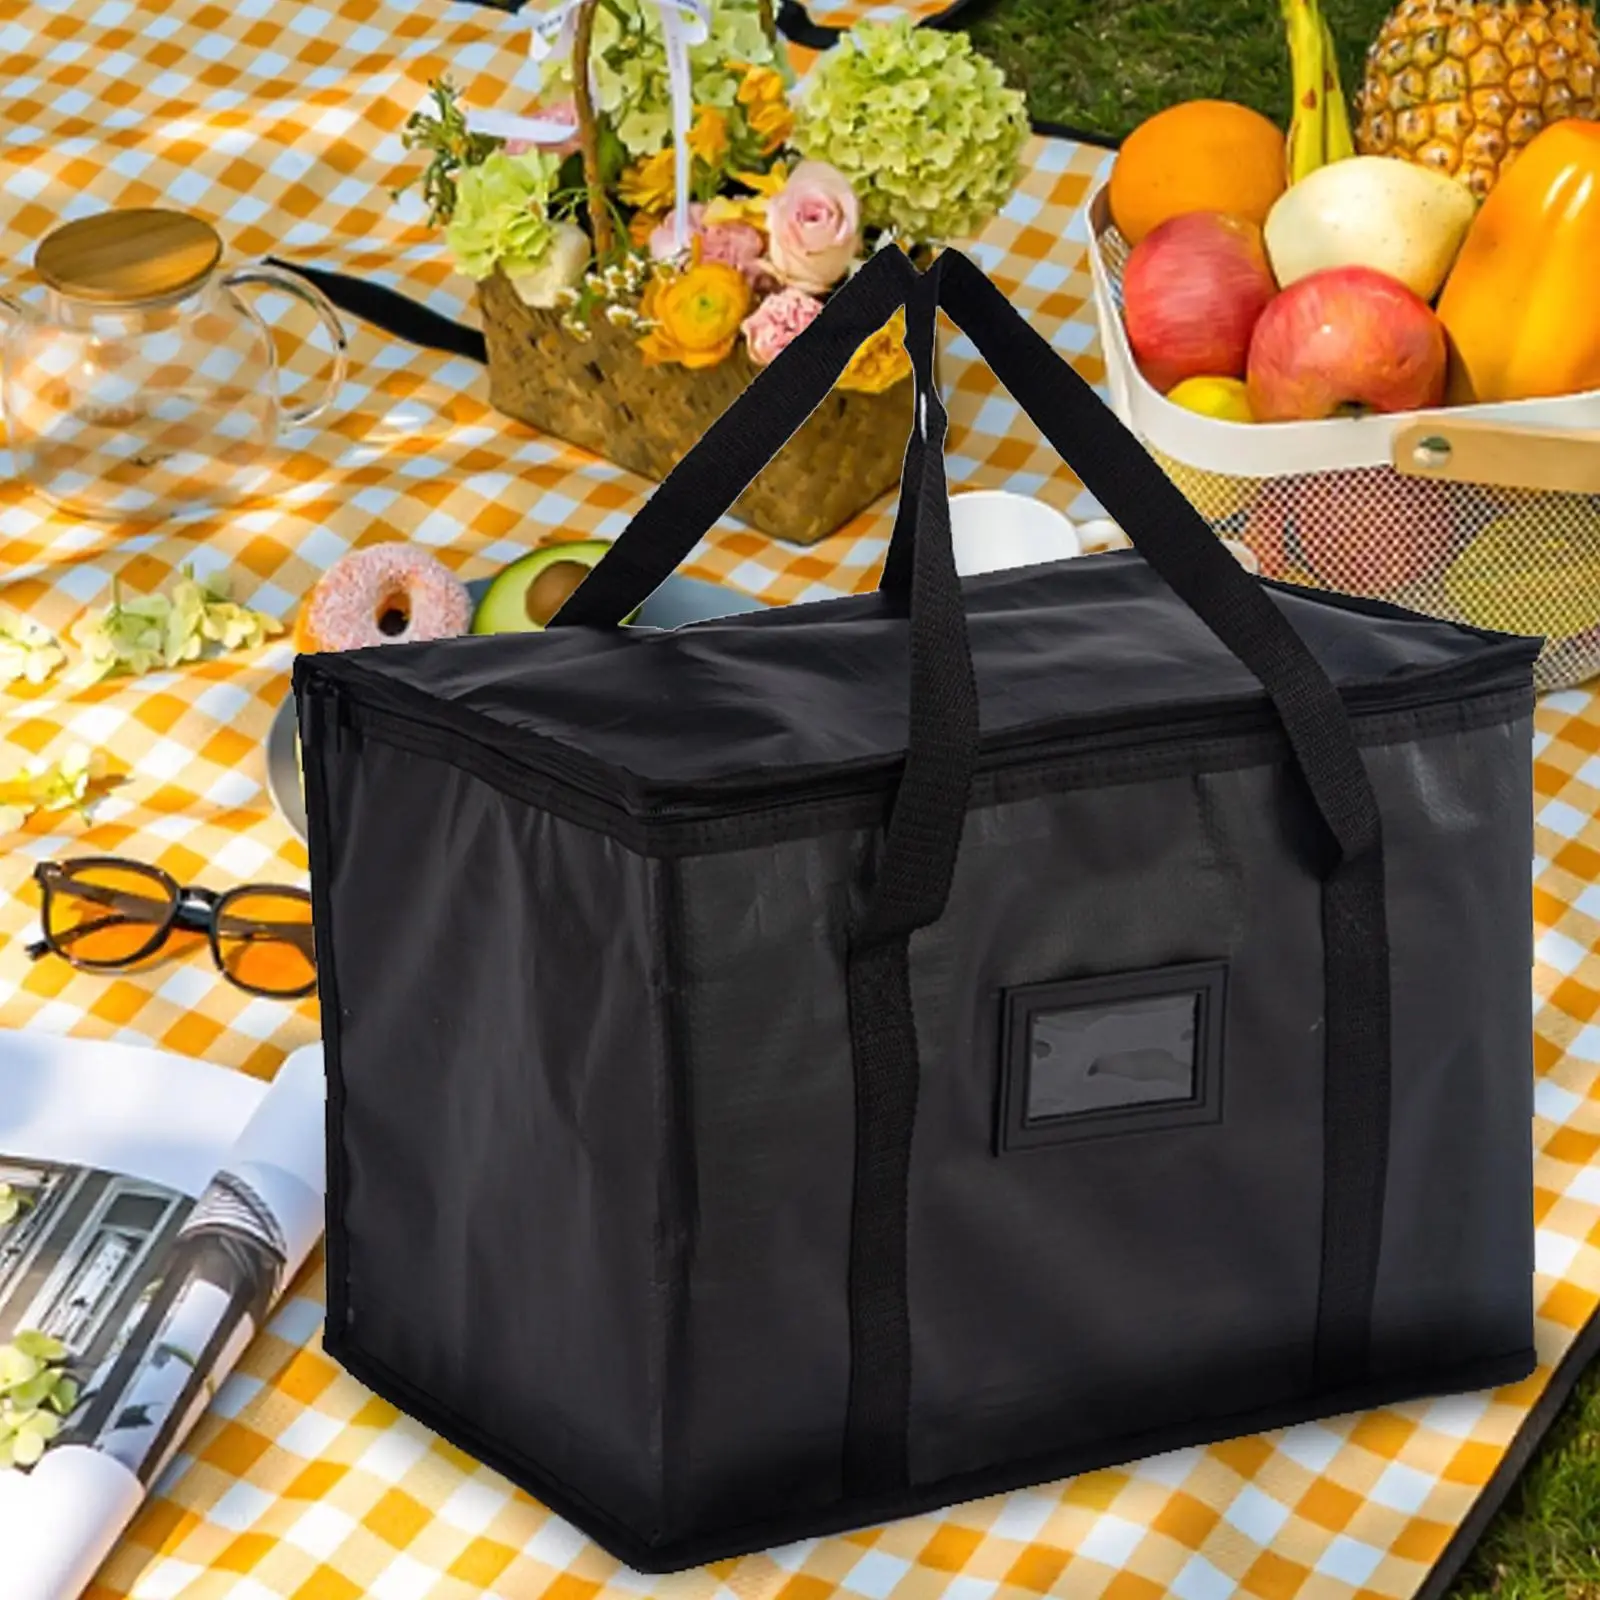 Insulated Cooler Bag Thickened Collapsible Waterproof Outdoor Reusable Shopping Bag for Catering Barbecue Travel Picnic Fishing